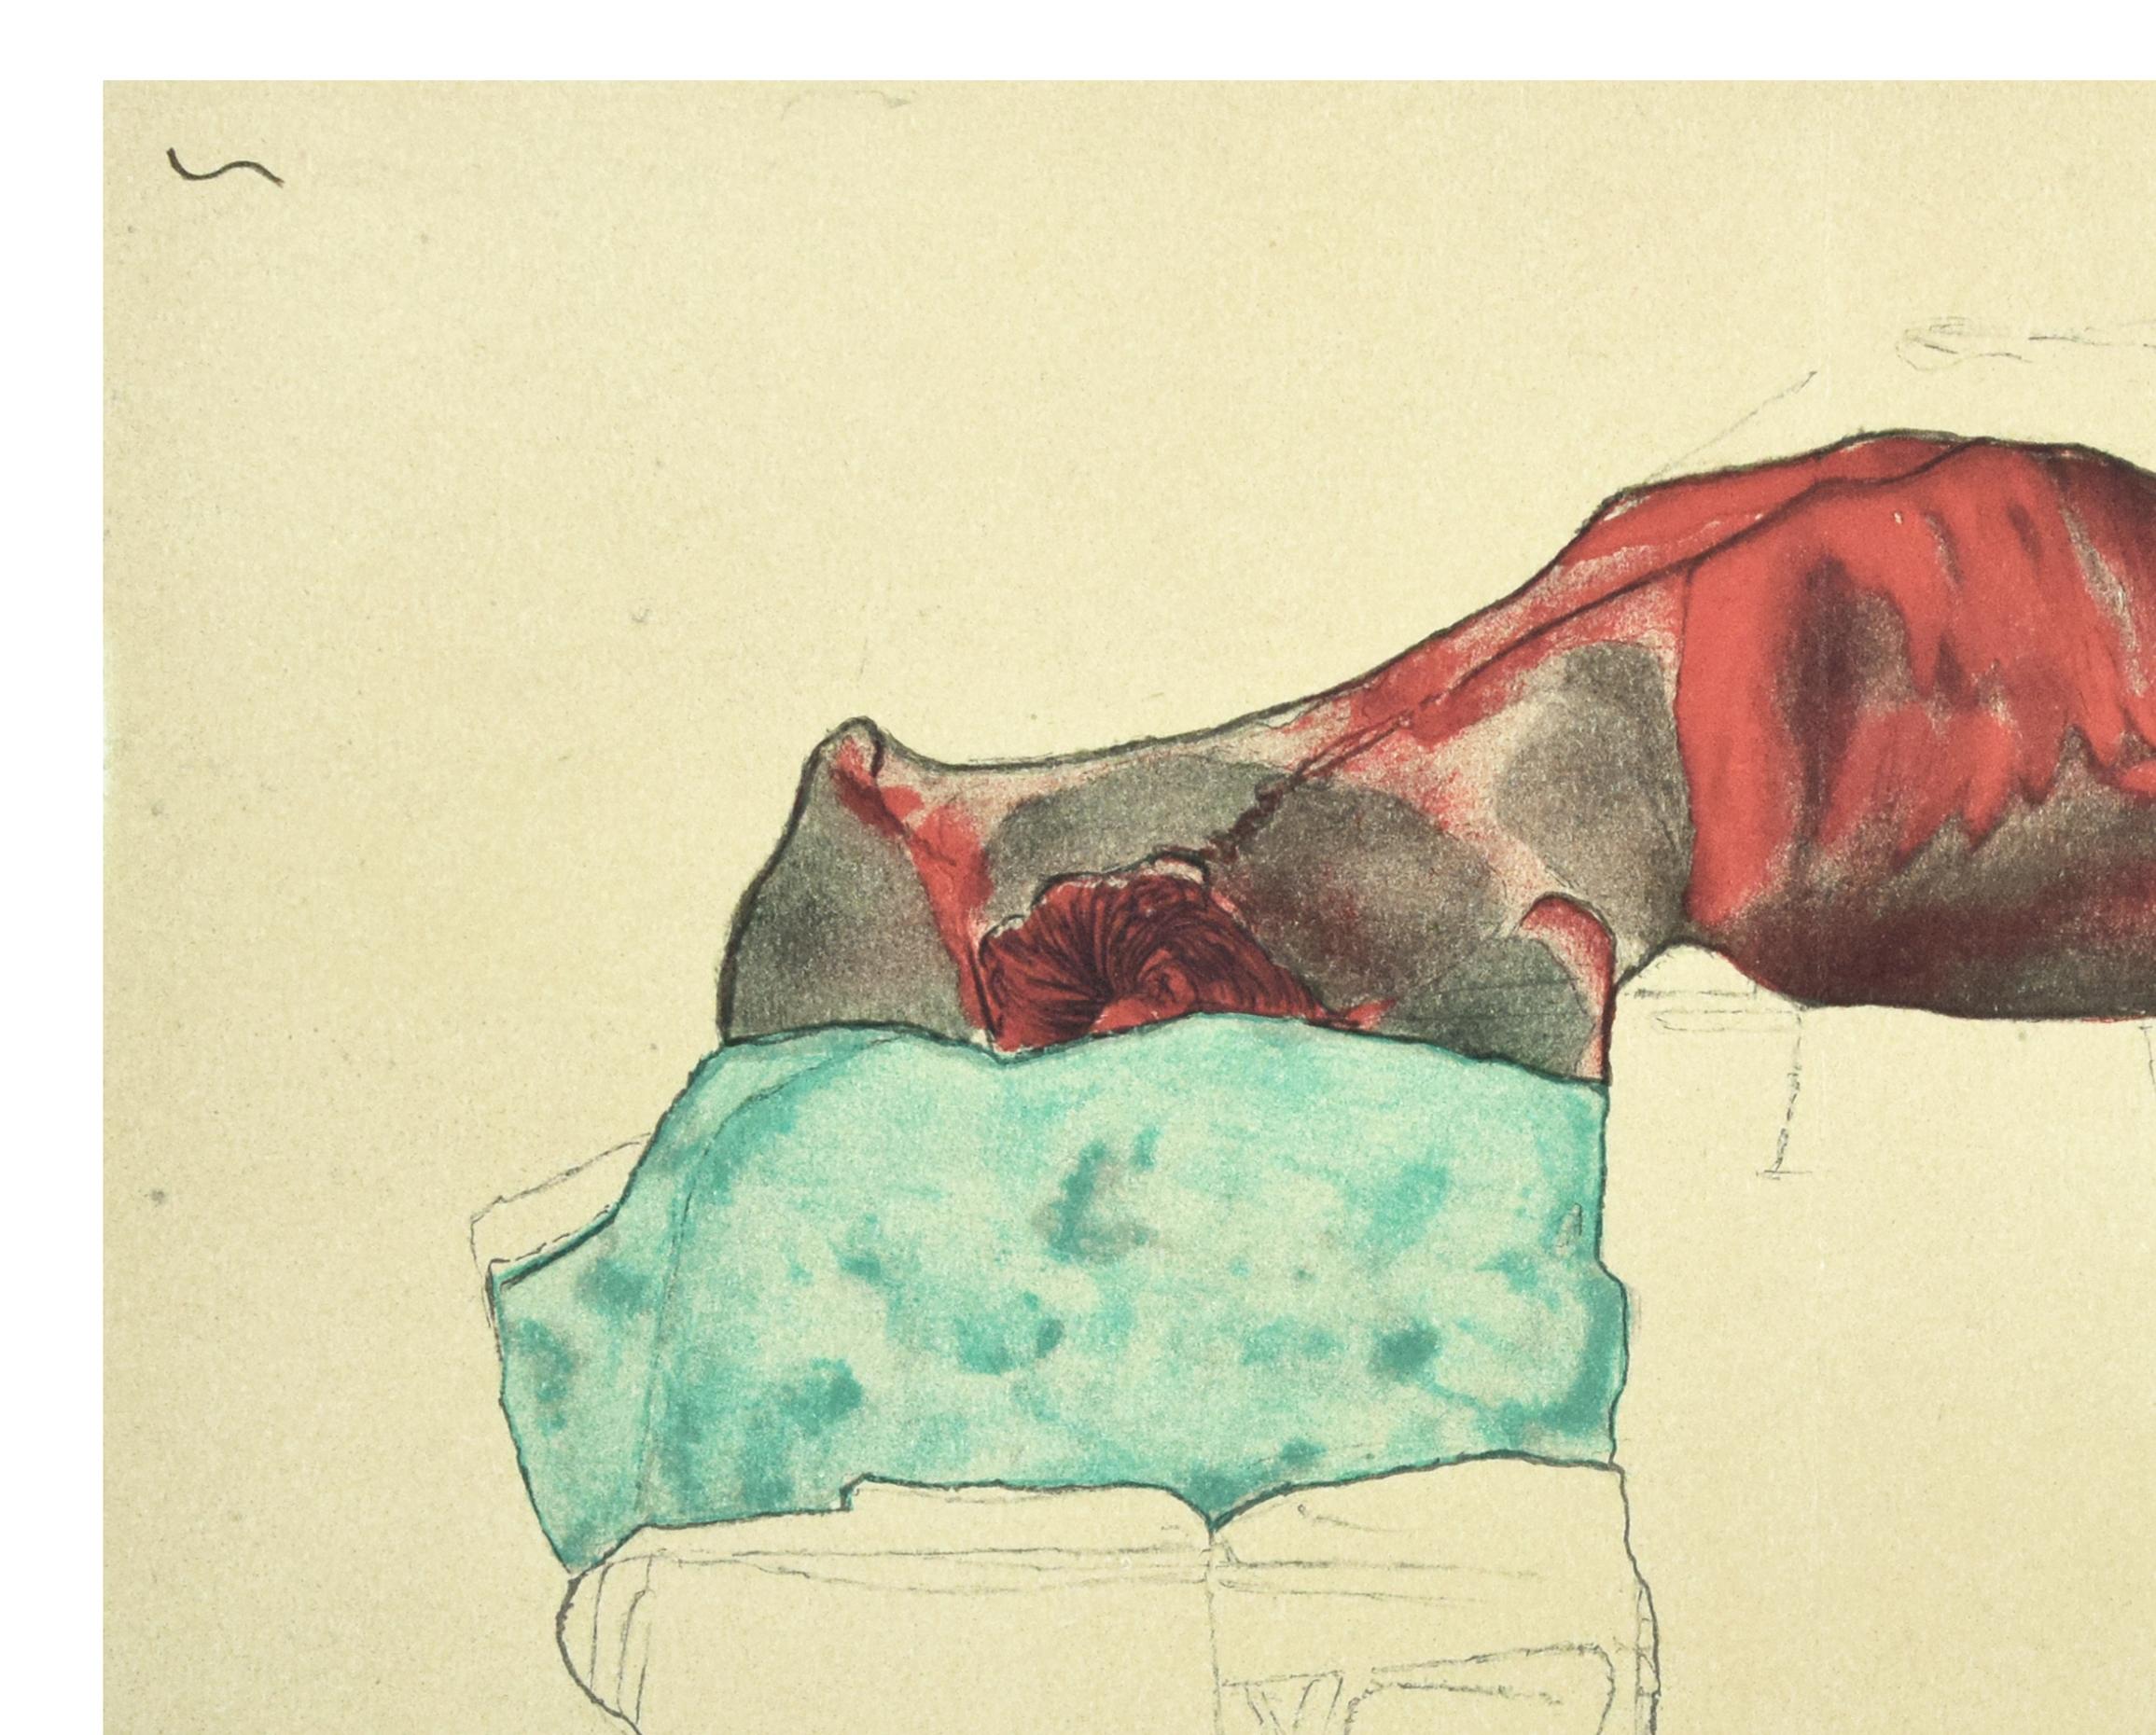 Reclining Male Reclining Male Nude with  - 2000s - Lithograph After Egon Schiele - Print by (after) Egon Schiele